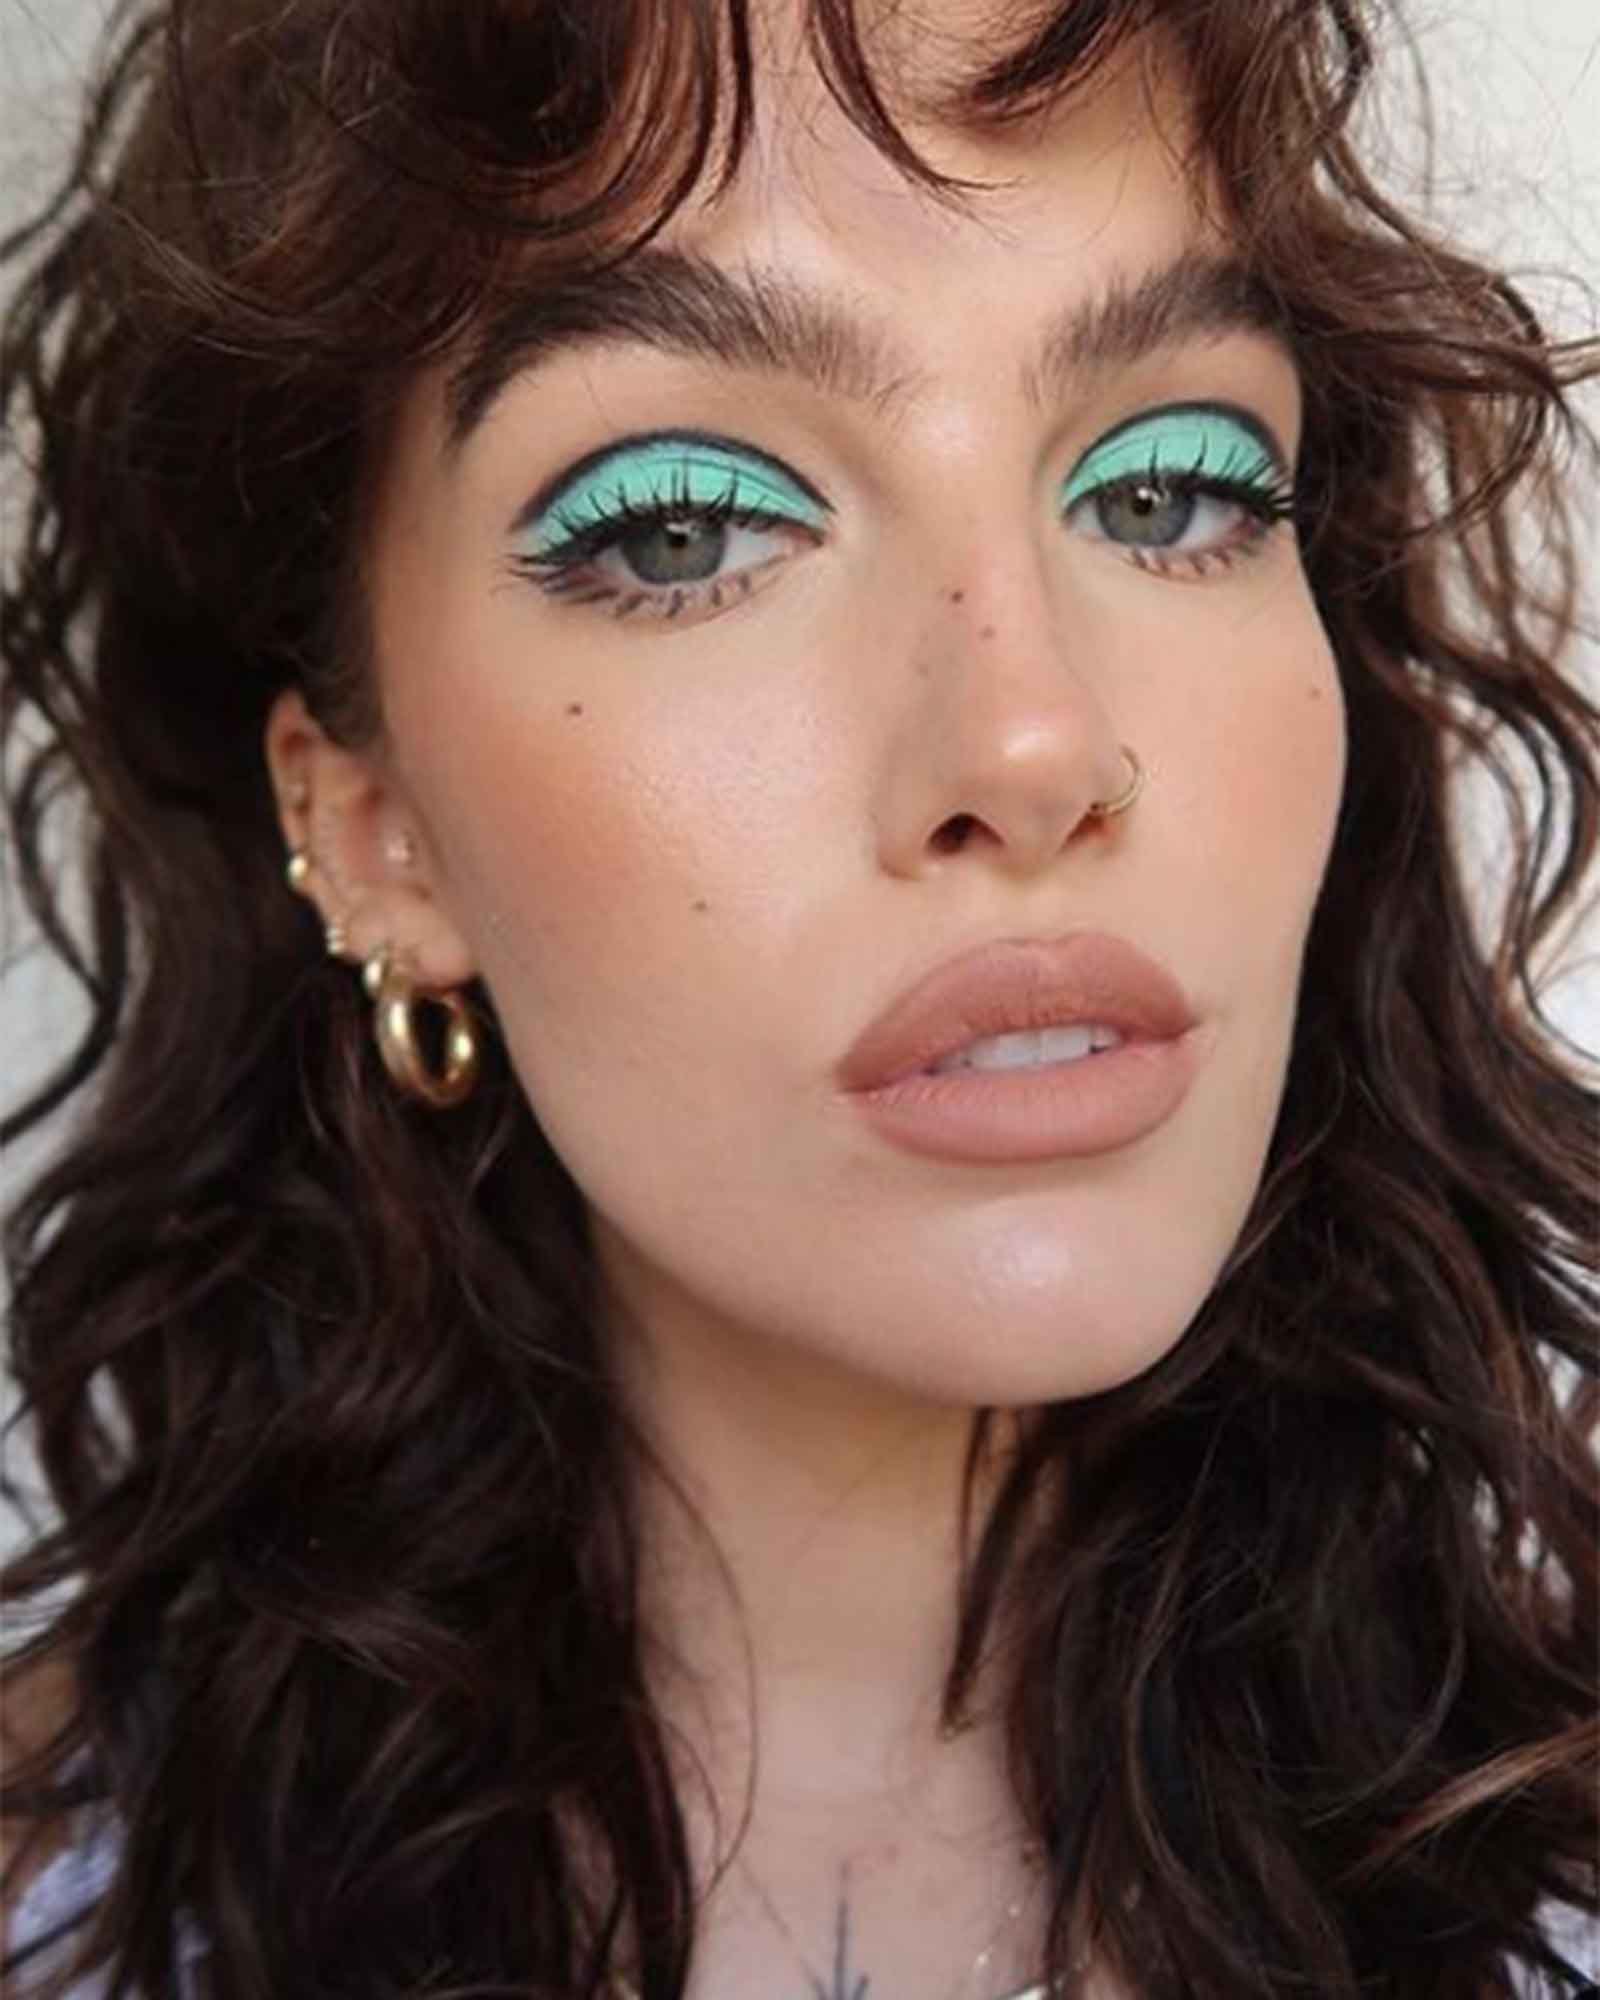 How To Do Festival Make-Up The Euphoria Way, According To Donni Davy